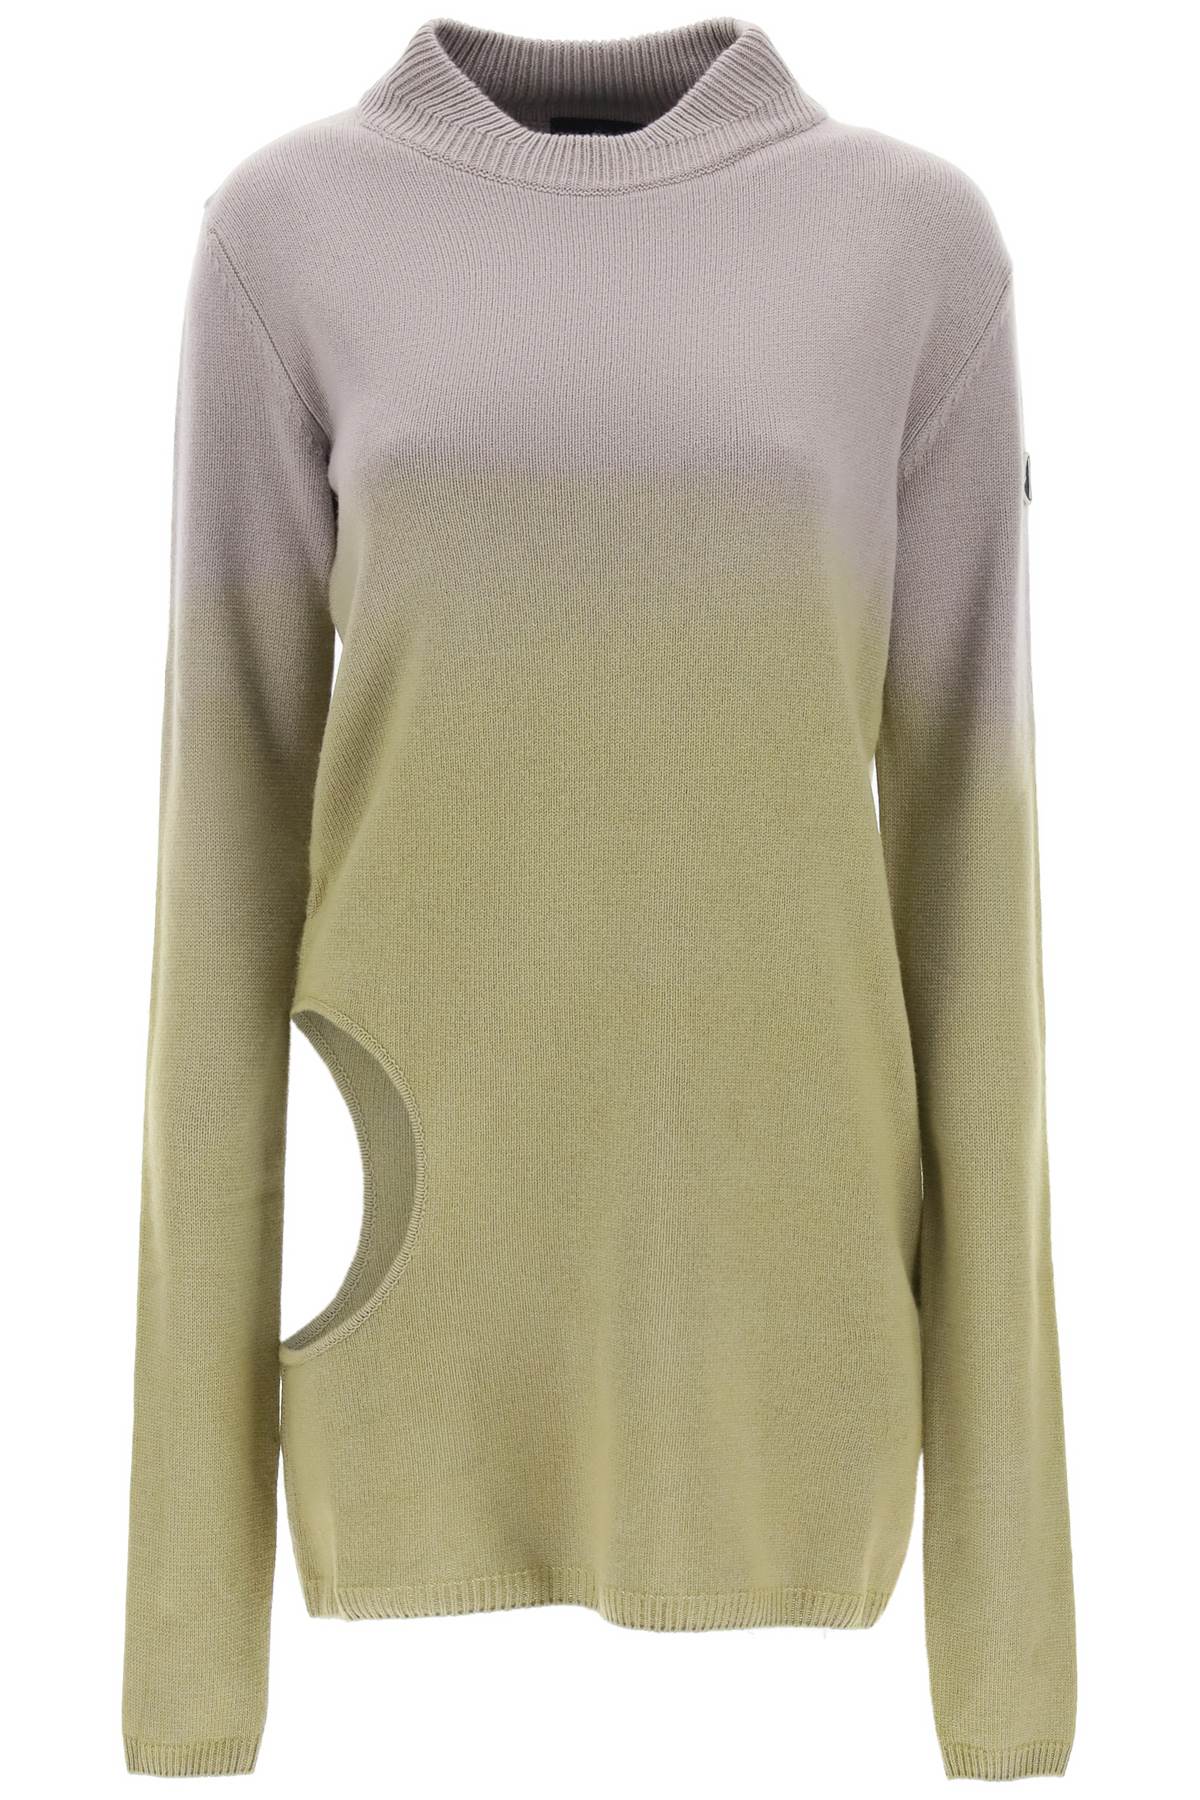 Subhuman Cut-out Cashmere Sweater